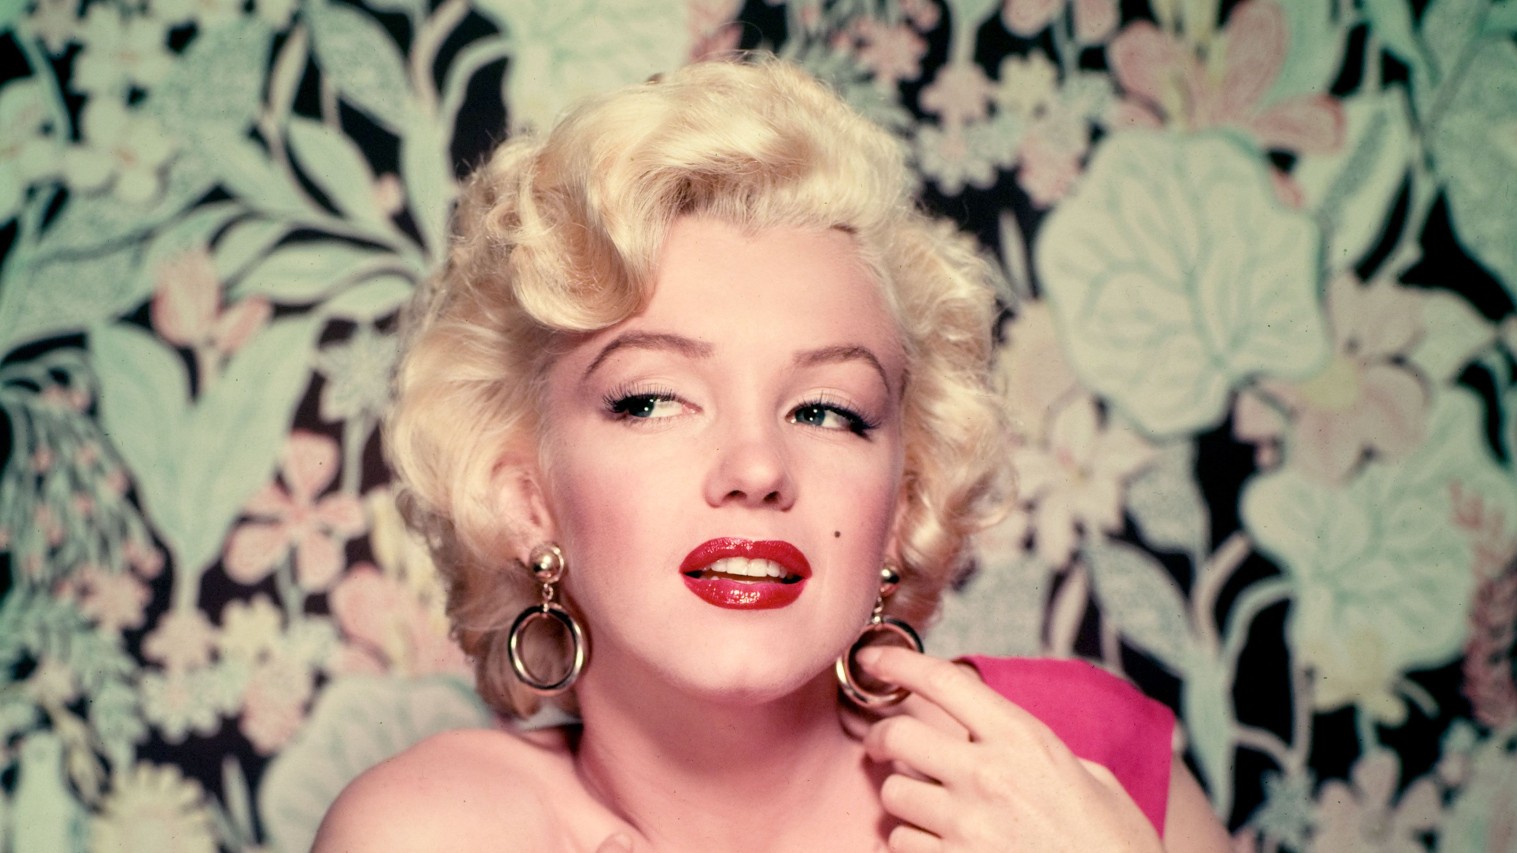 Marilyn Monroes earrings sold for 185000 in auction